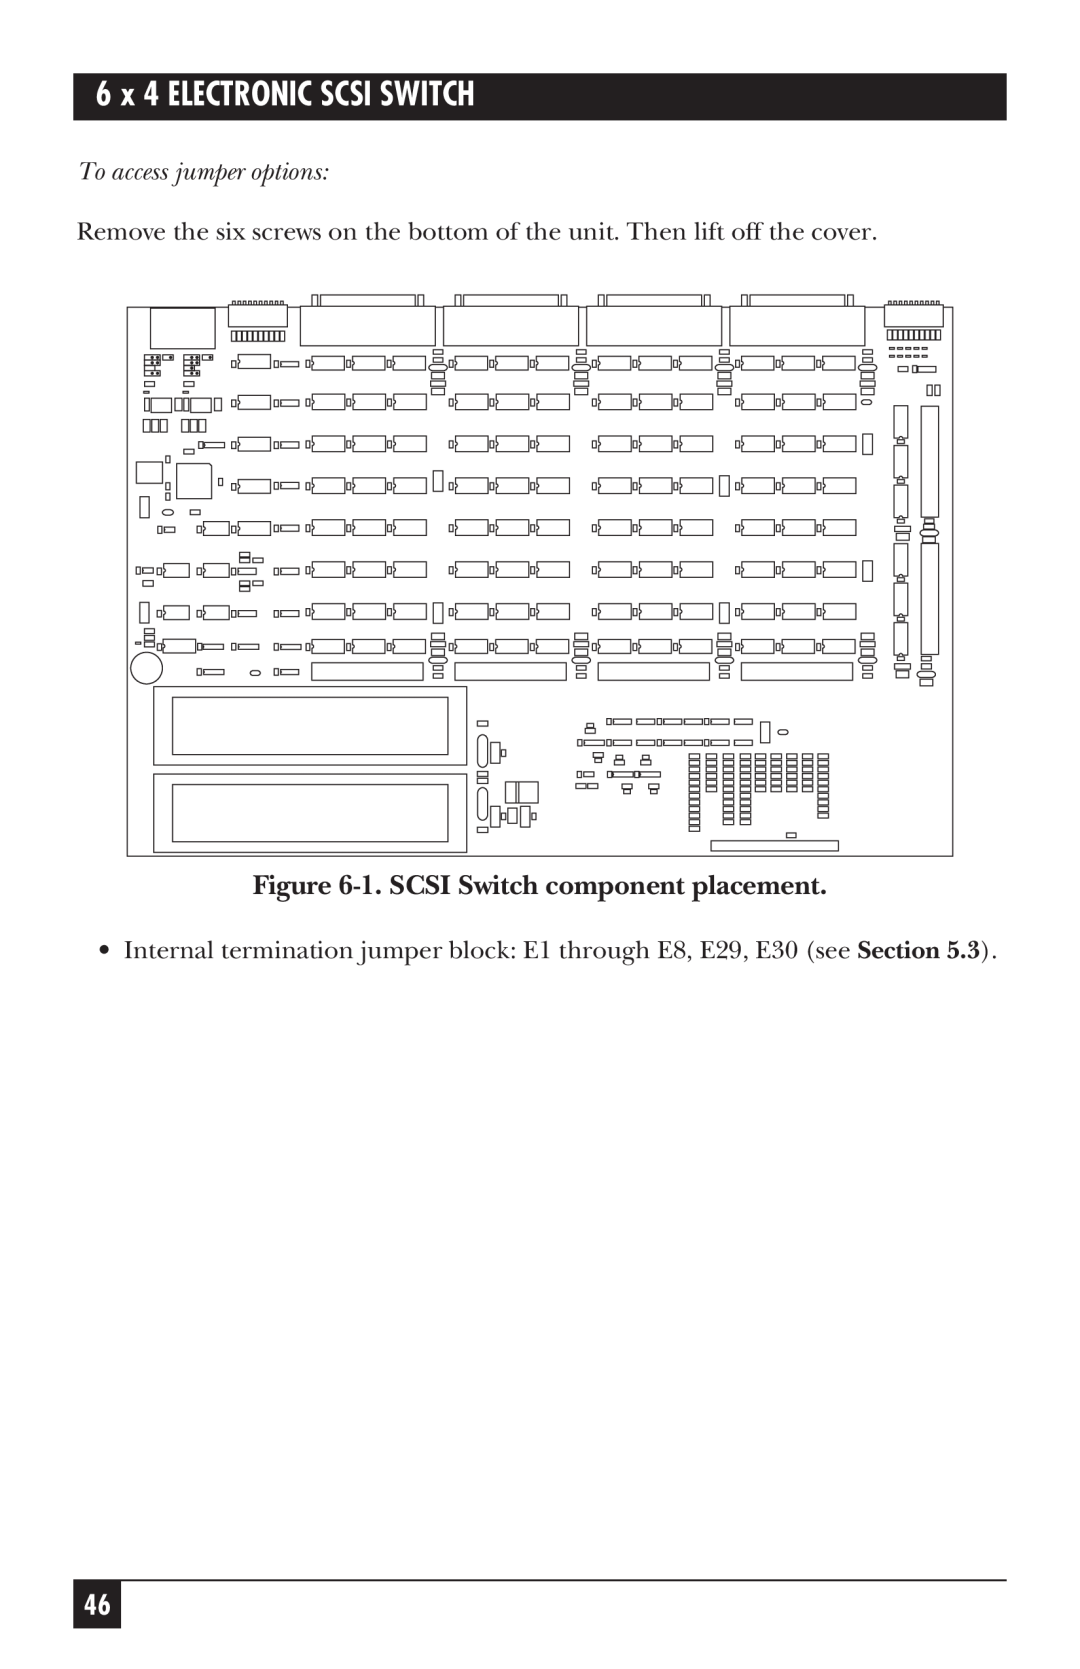 Black Box SW487A-R2 manual 1. SCSI Switch component placement, 6 x 4 ELECTRONIC SCSI SWITCH 